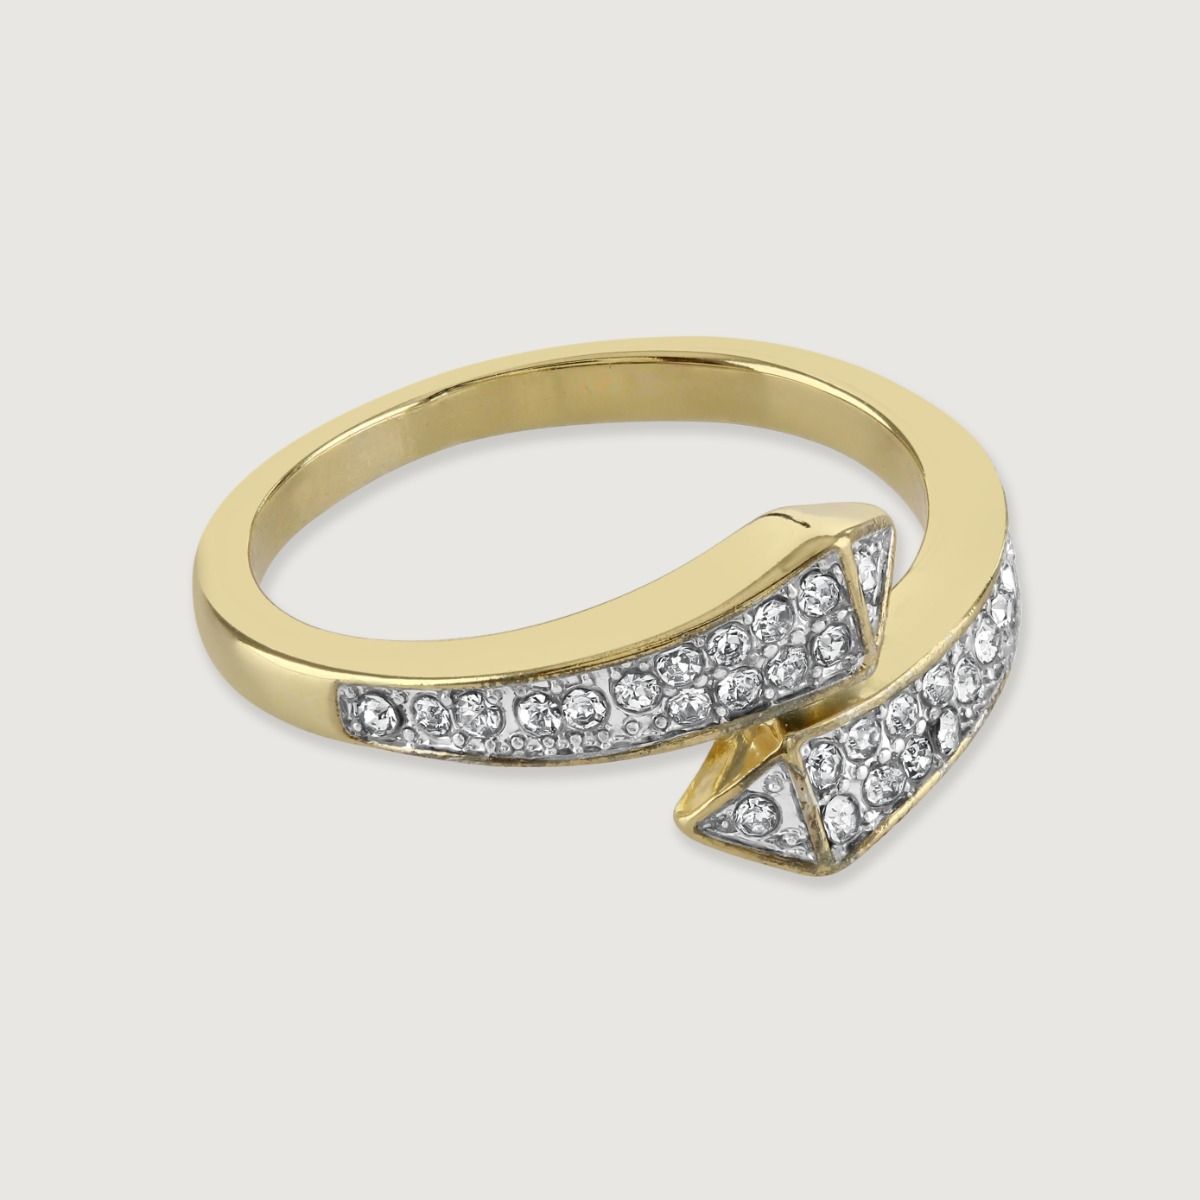 The Two-Tone Pave Ring is a captivating piece of jewellery that beautifully combines elegance and sparkle. The contrasting tones and shimmering pave stones create a mesmerising effect, making it a truly eye-catching accessory